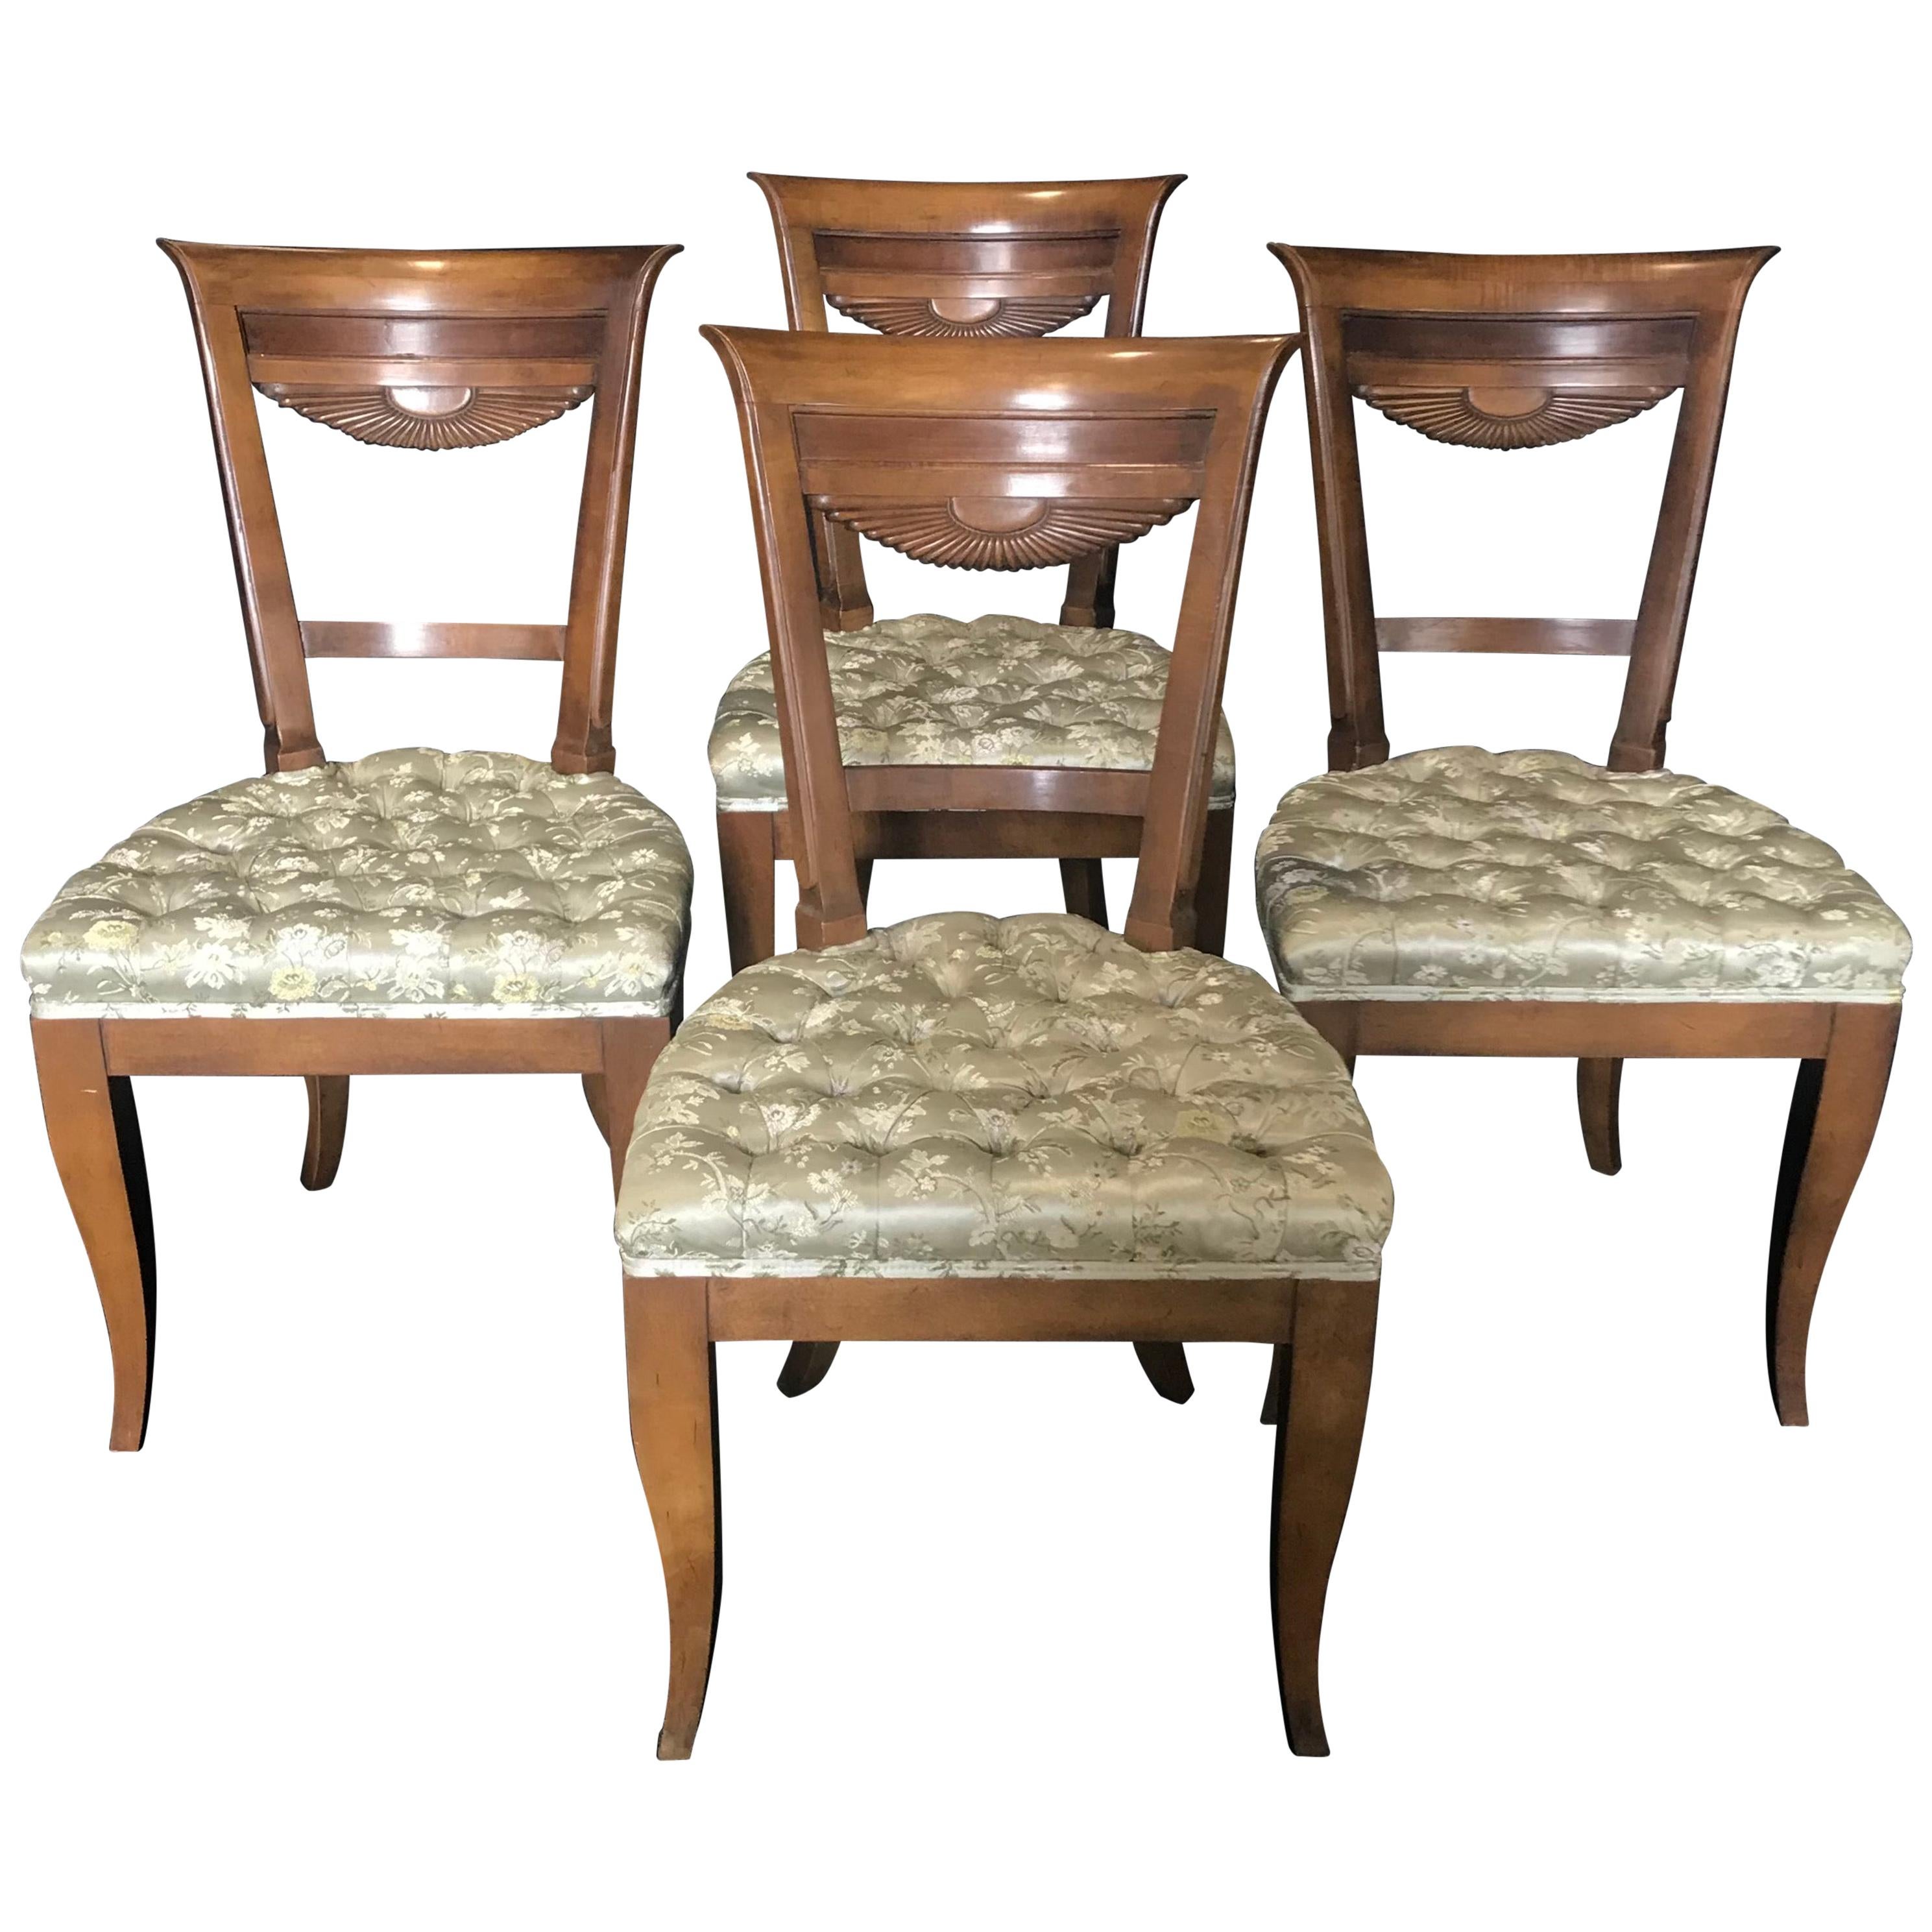 Set of 4 French Walnut Dining Chairs with Fan Backs